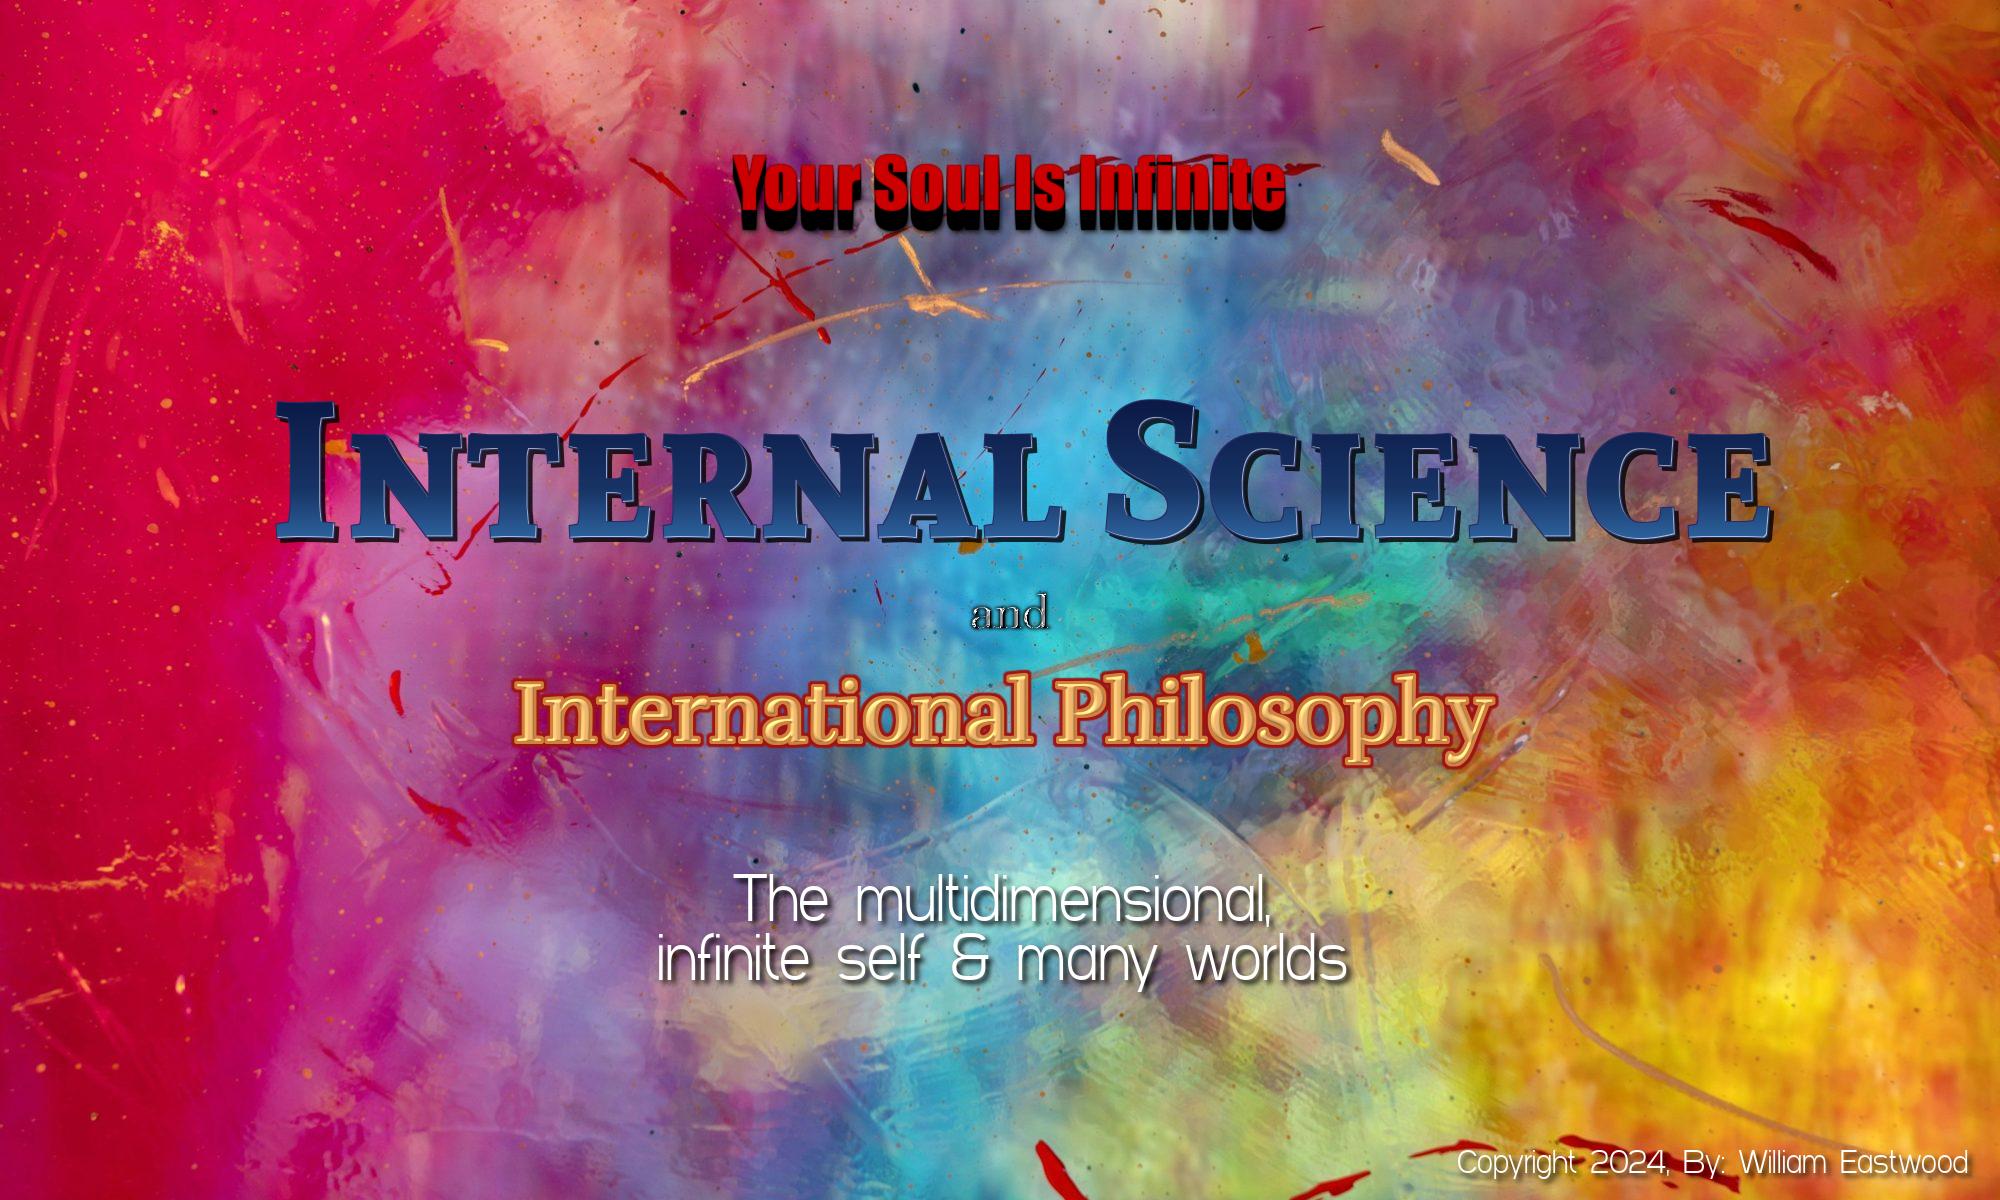 Internal Science Has a Heart & Soul: Vision & Purpose